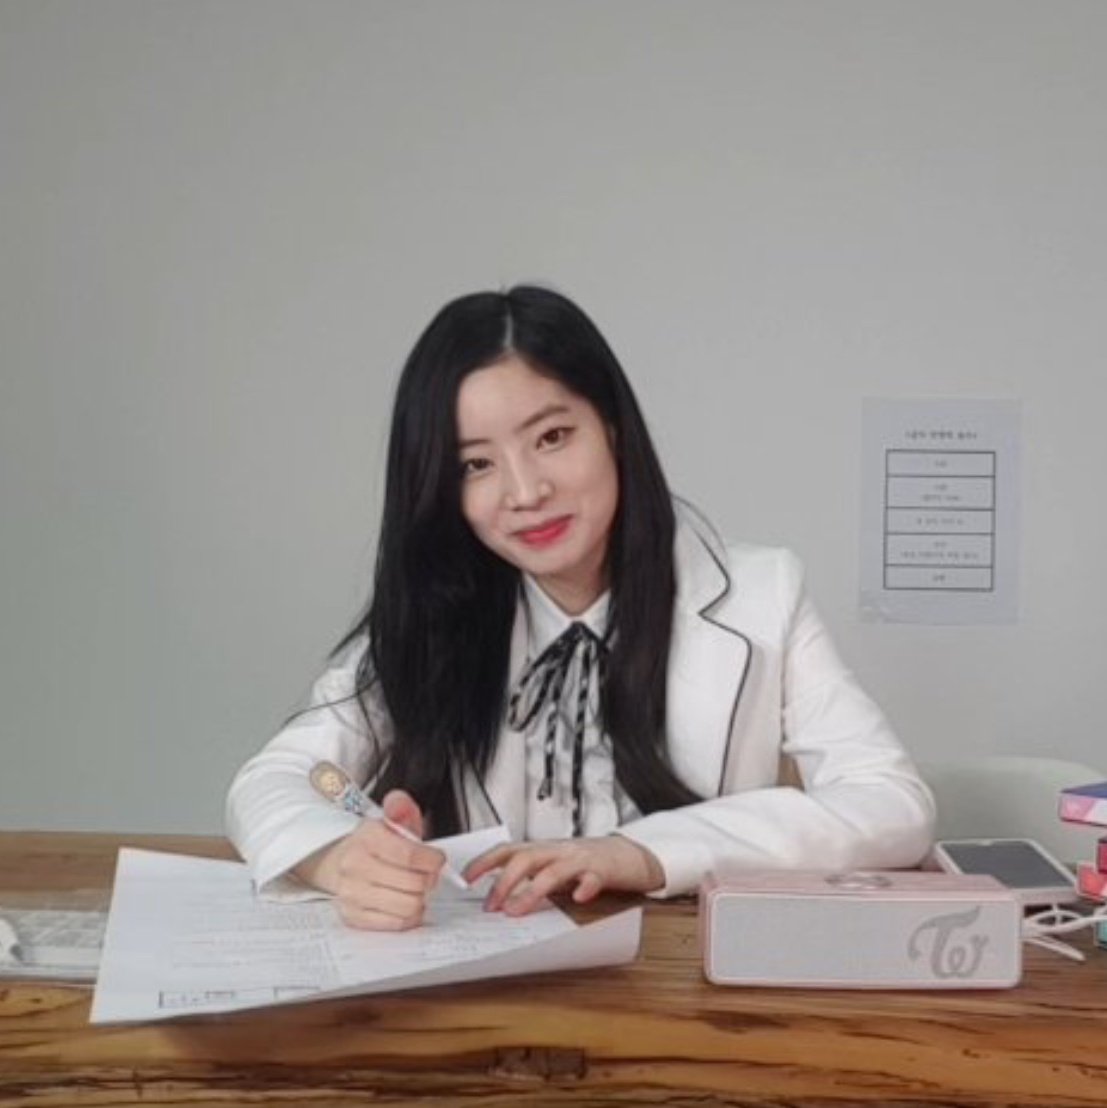 • you'll be more happy studying with her right? right.—  #HappyDAHYUNDay—  #OurShiningLightDAHYUN